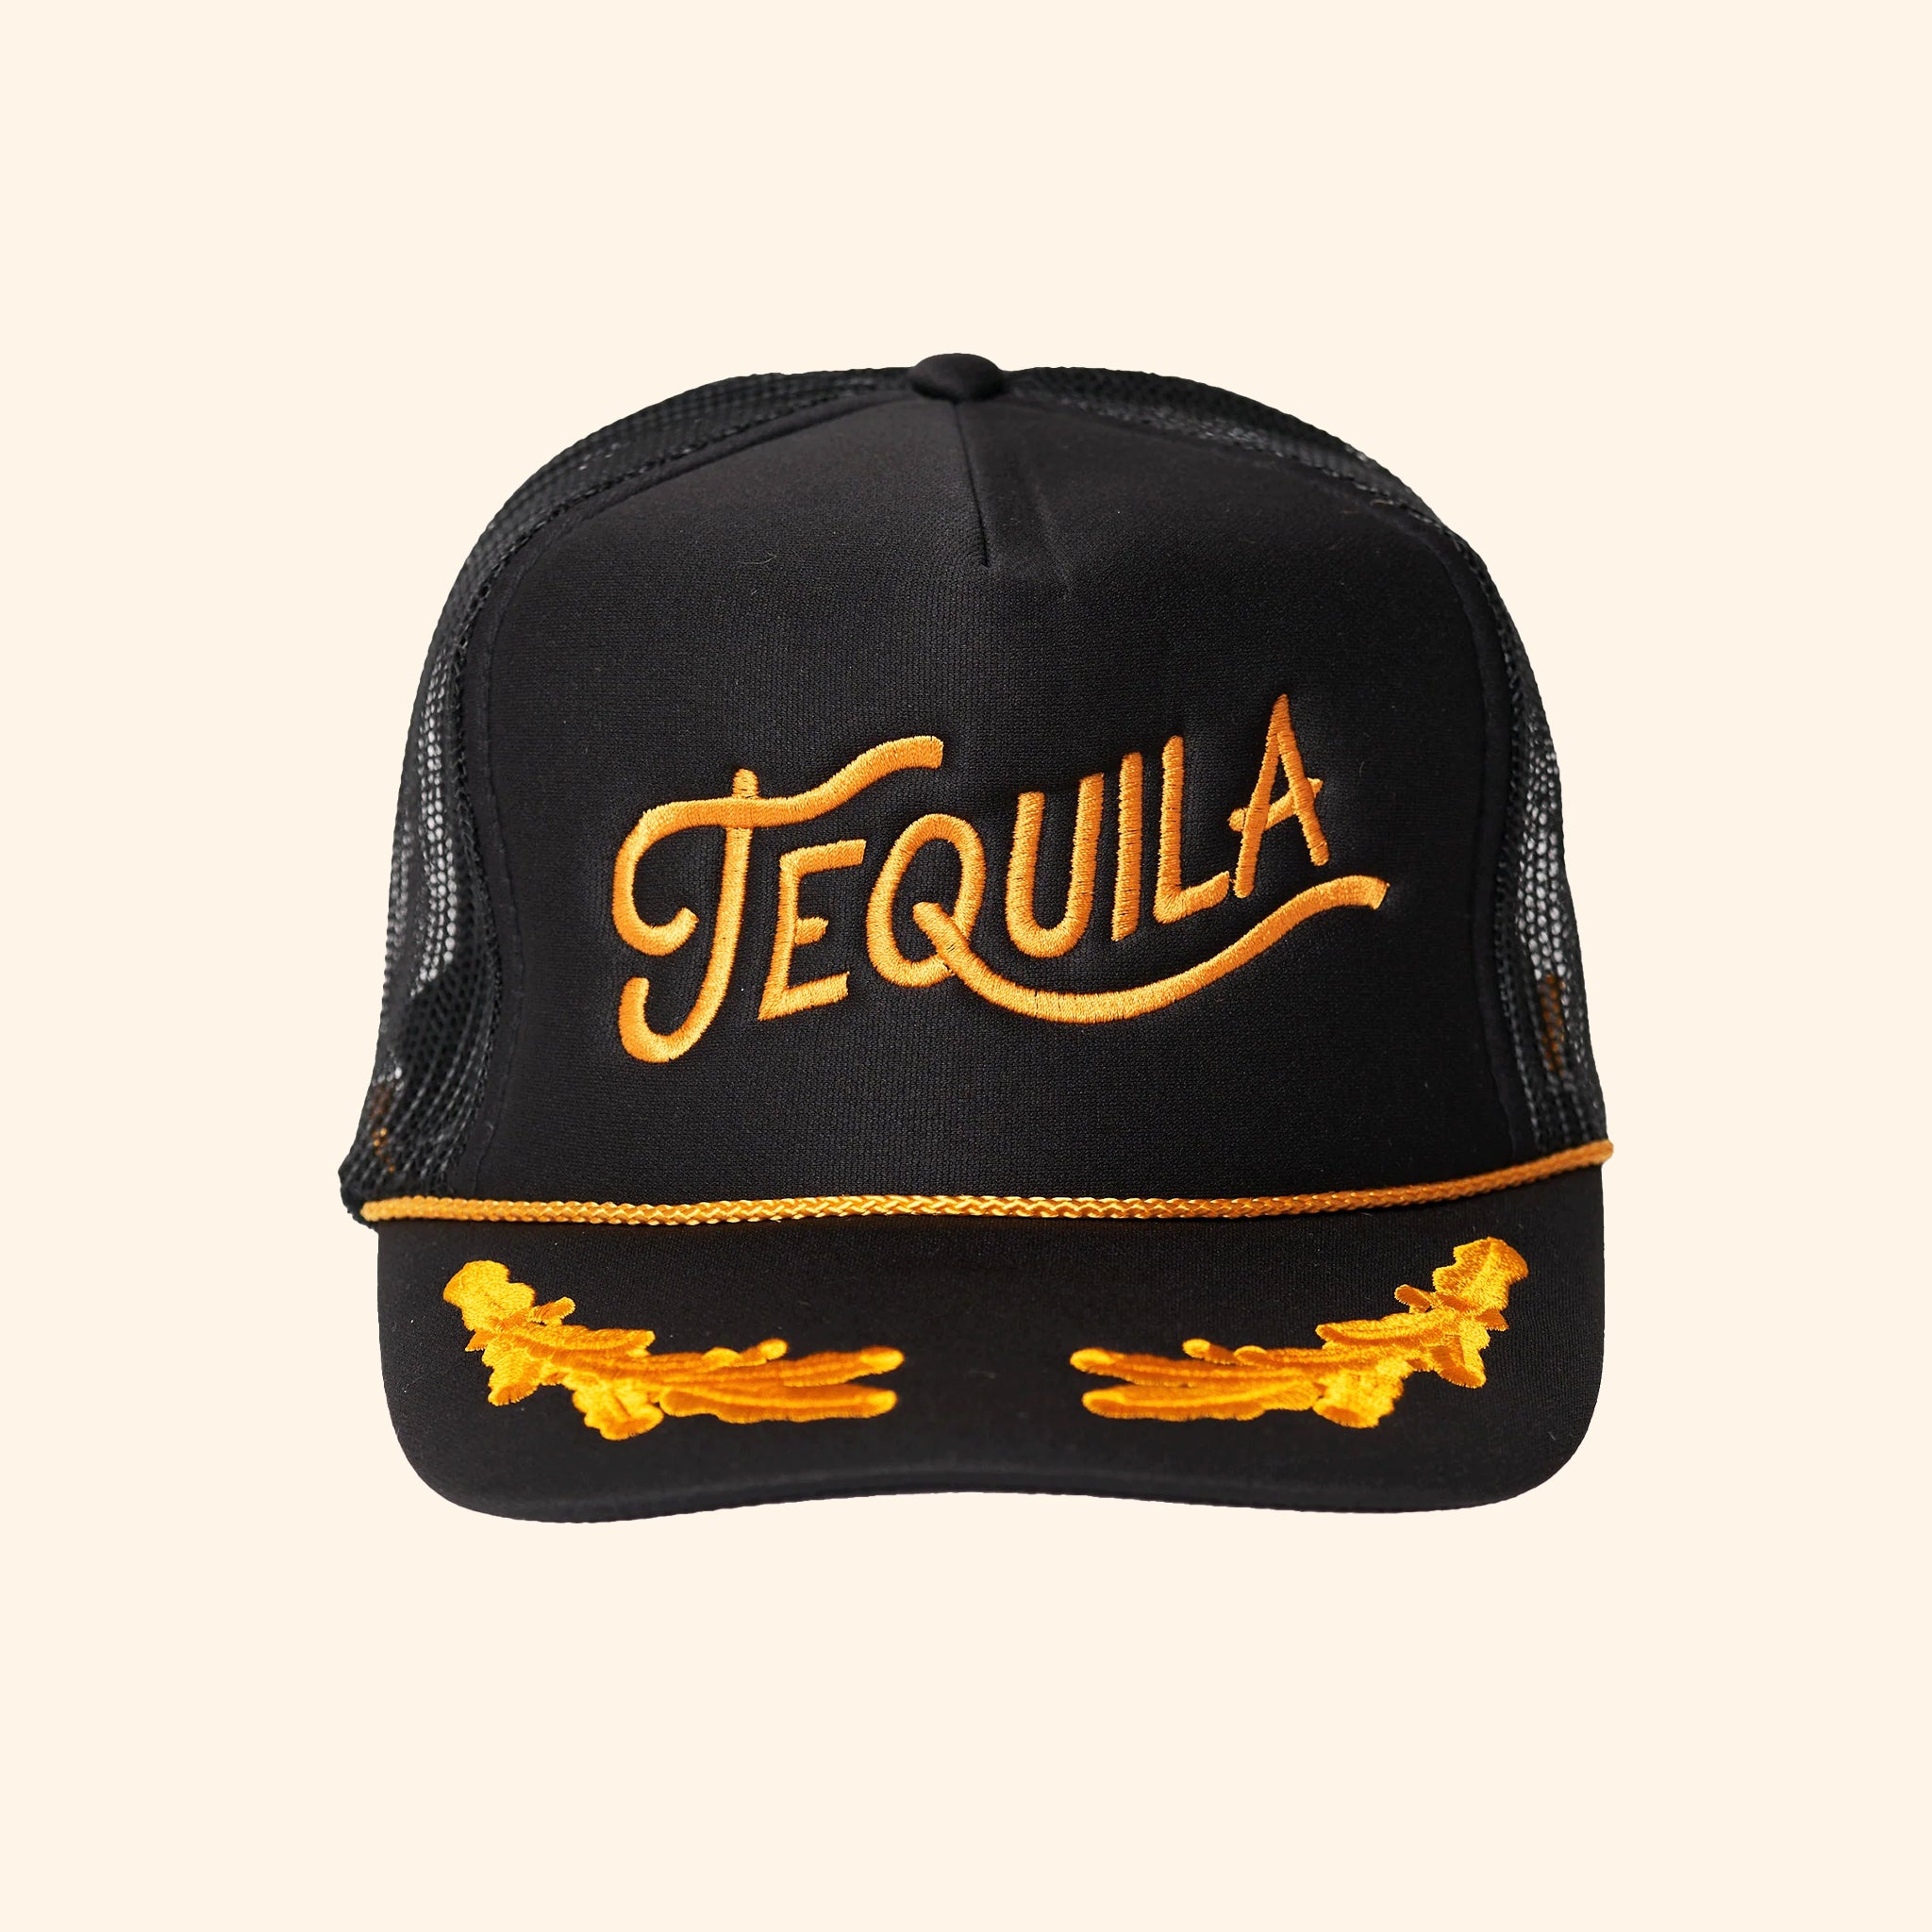 A black mesh back snapback trucker hat with gold embroidered text that reads, "Tequila". 